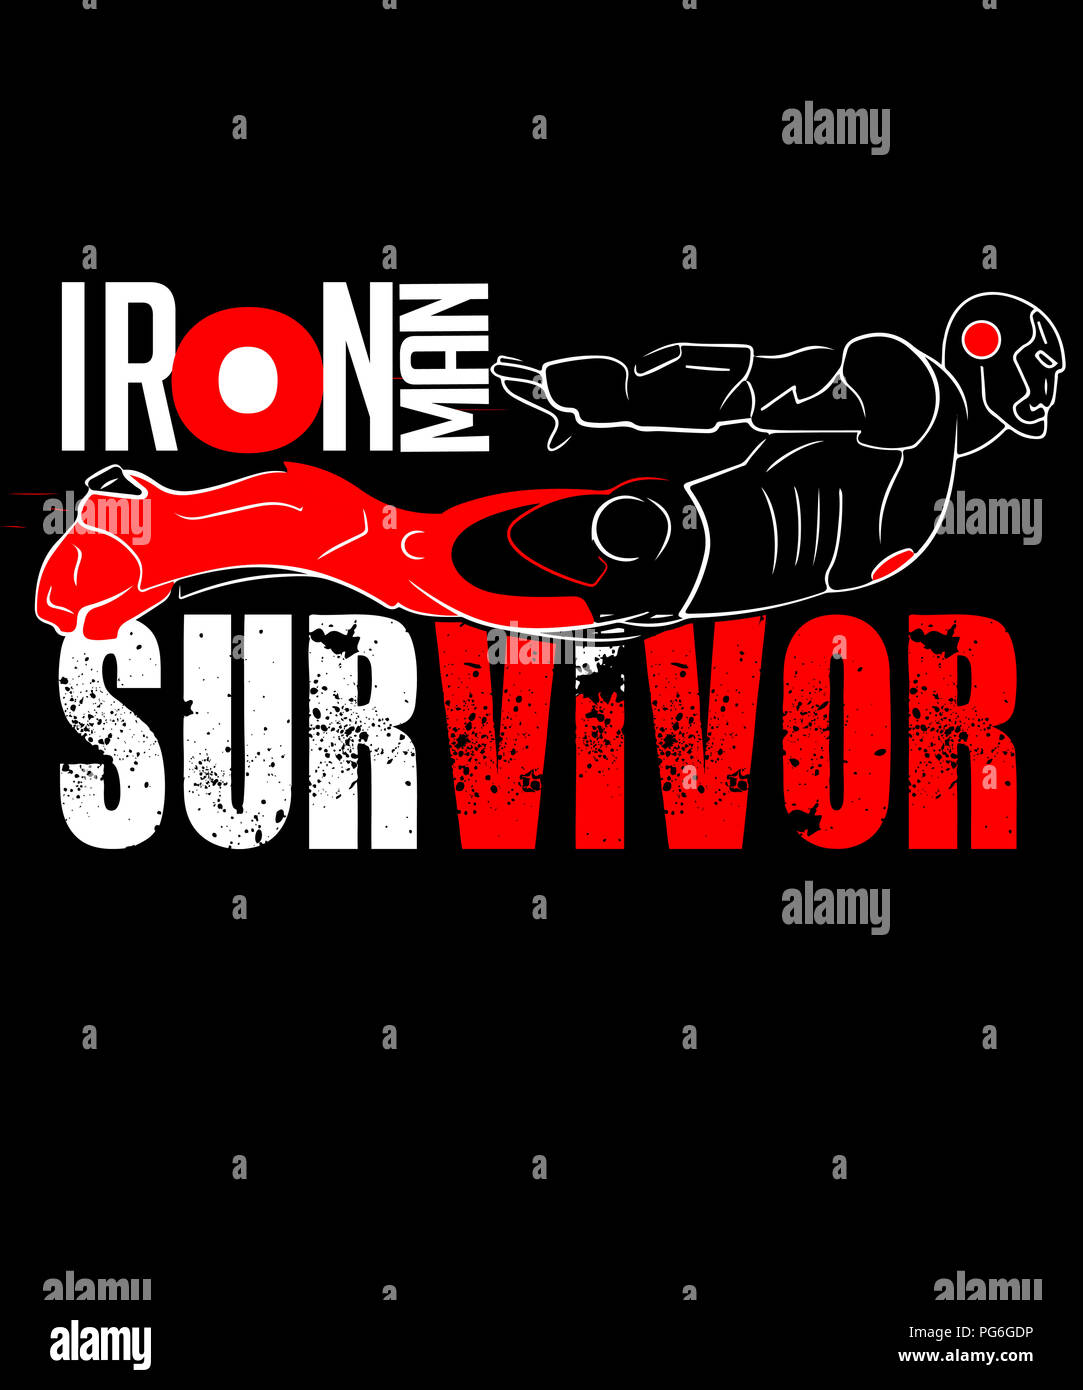 Iron man survivor illustration on a black background with a grunge vibe.  Would make great wall art too Stock Photo - Alamy